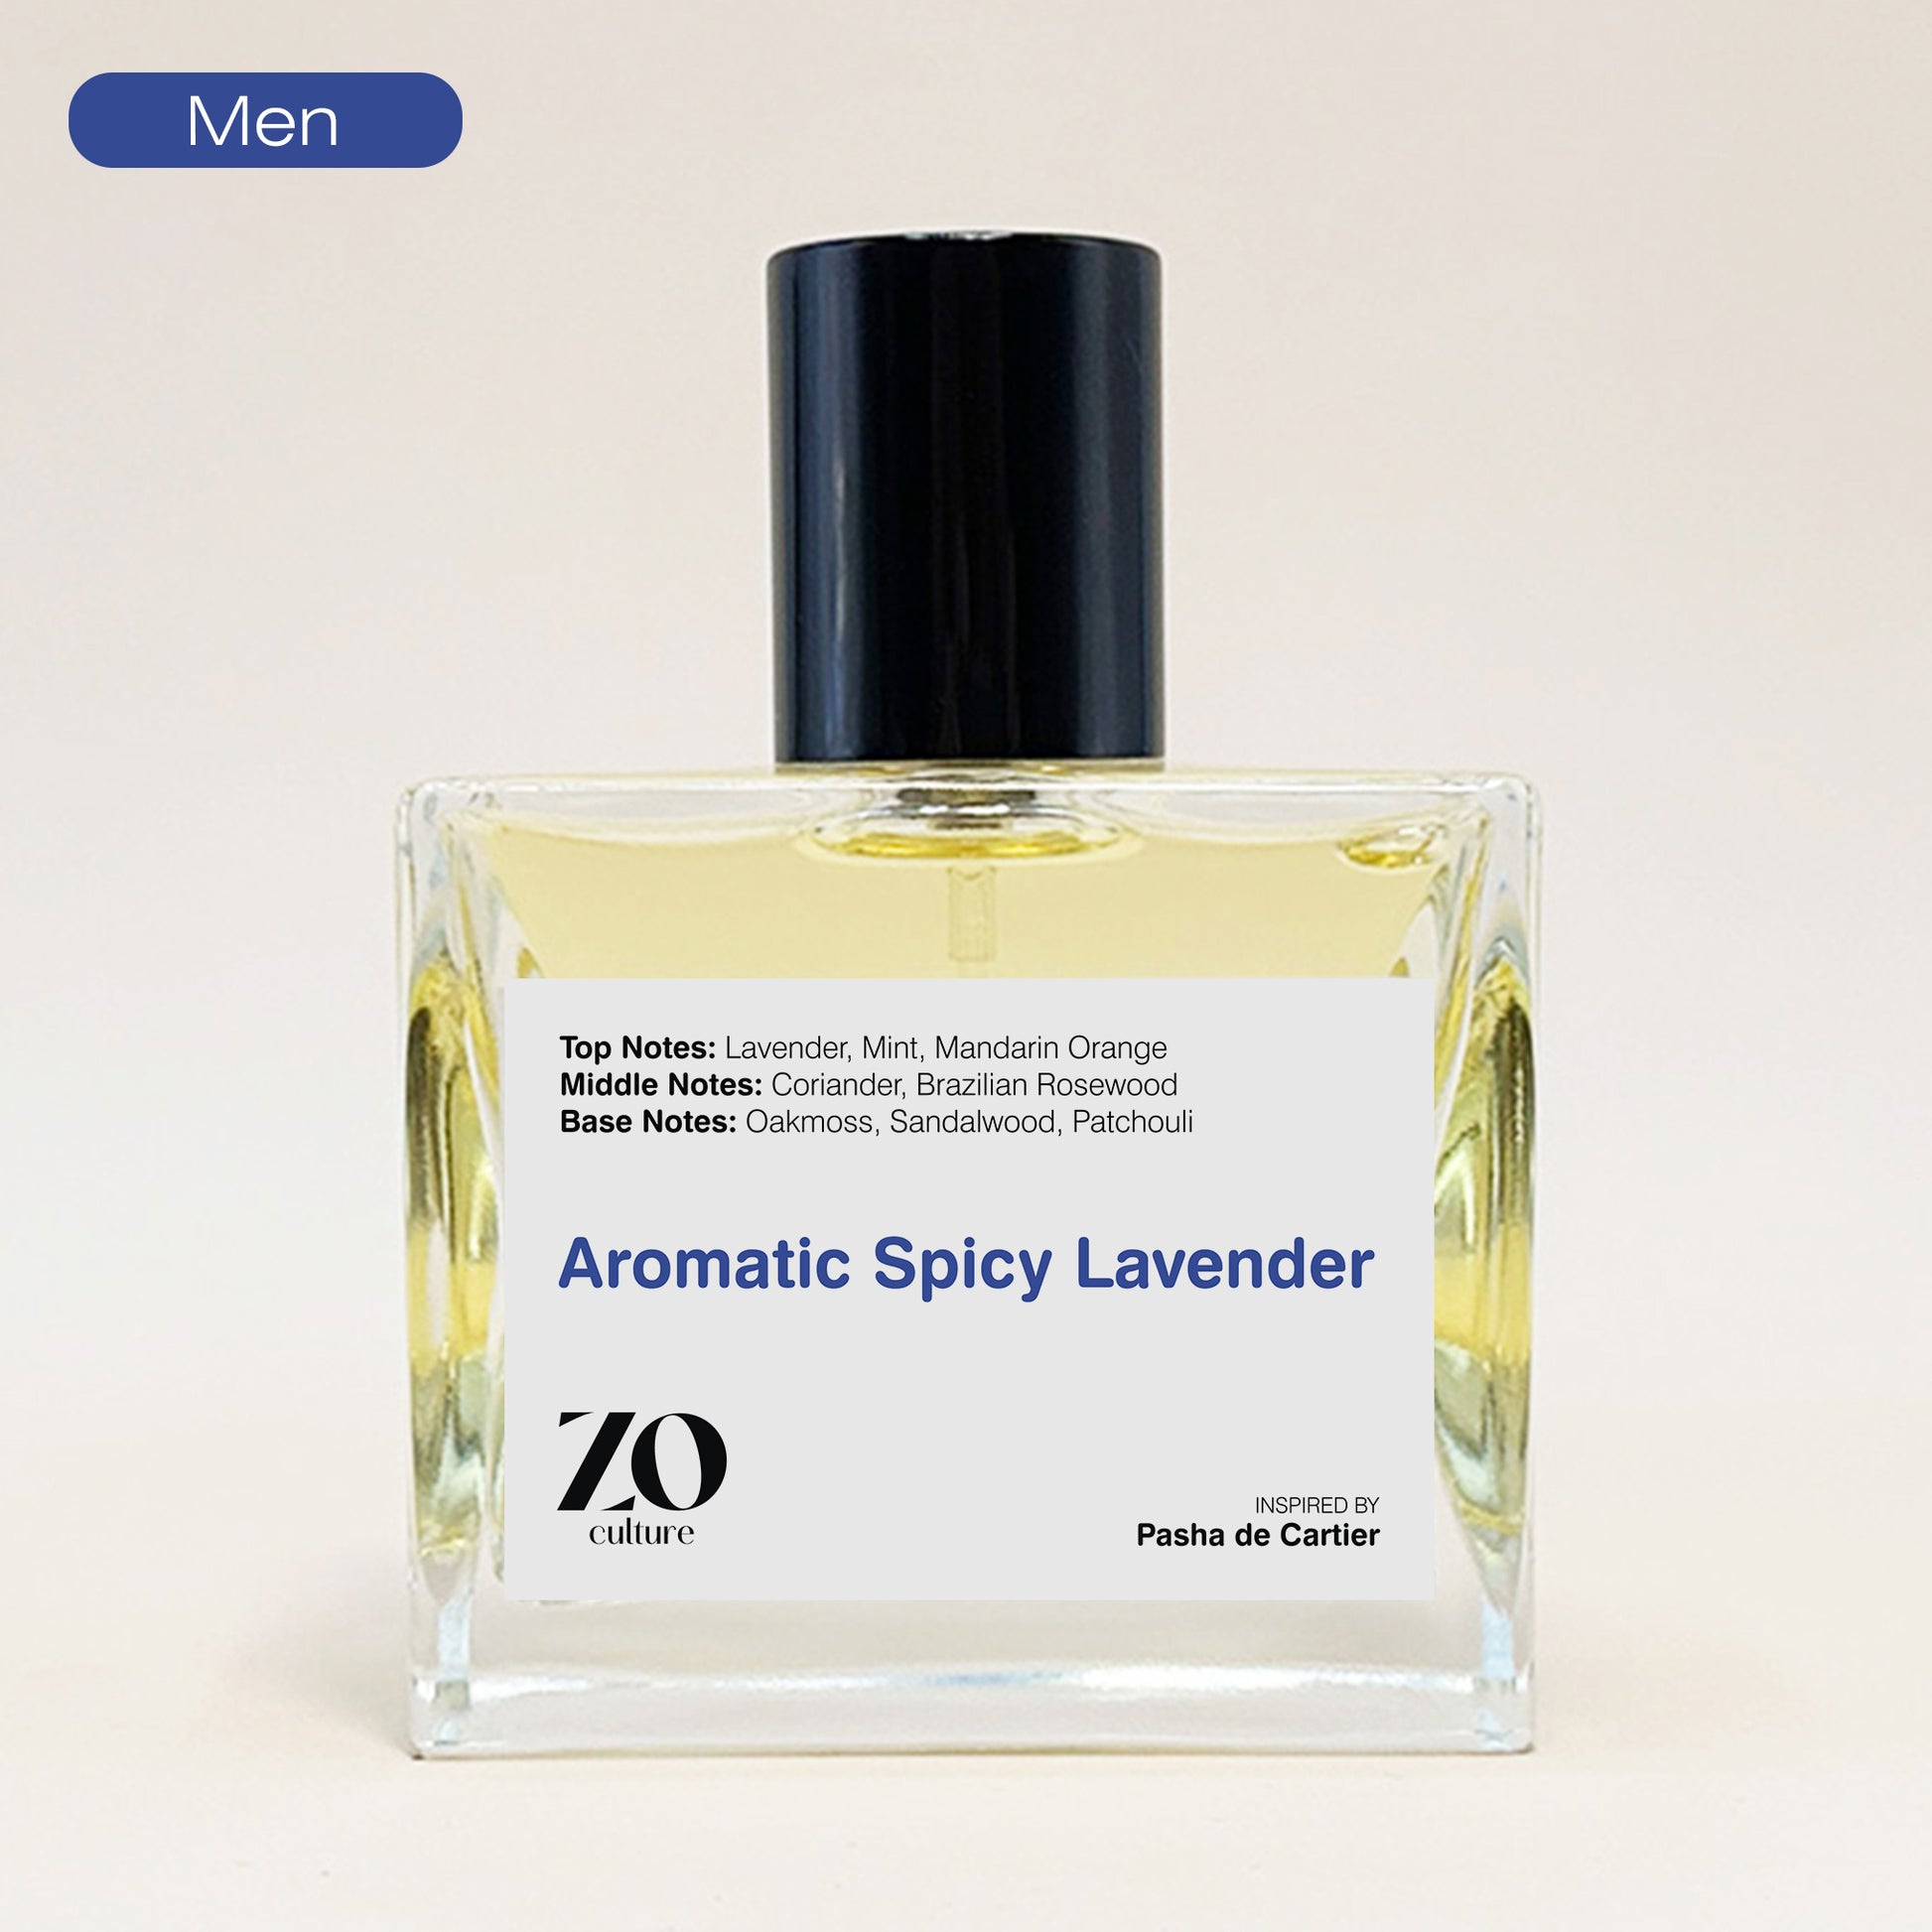 Men Perfume Aromatic Spicy Lavender - Inspired by Cartier de Pasha ZoCulture